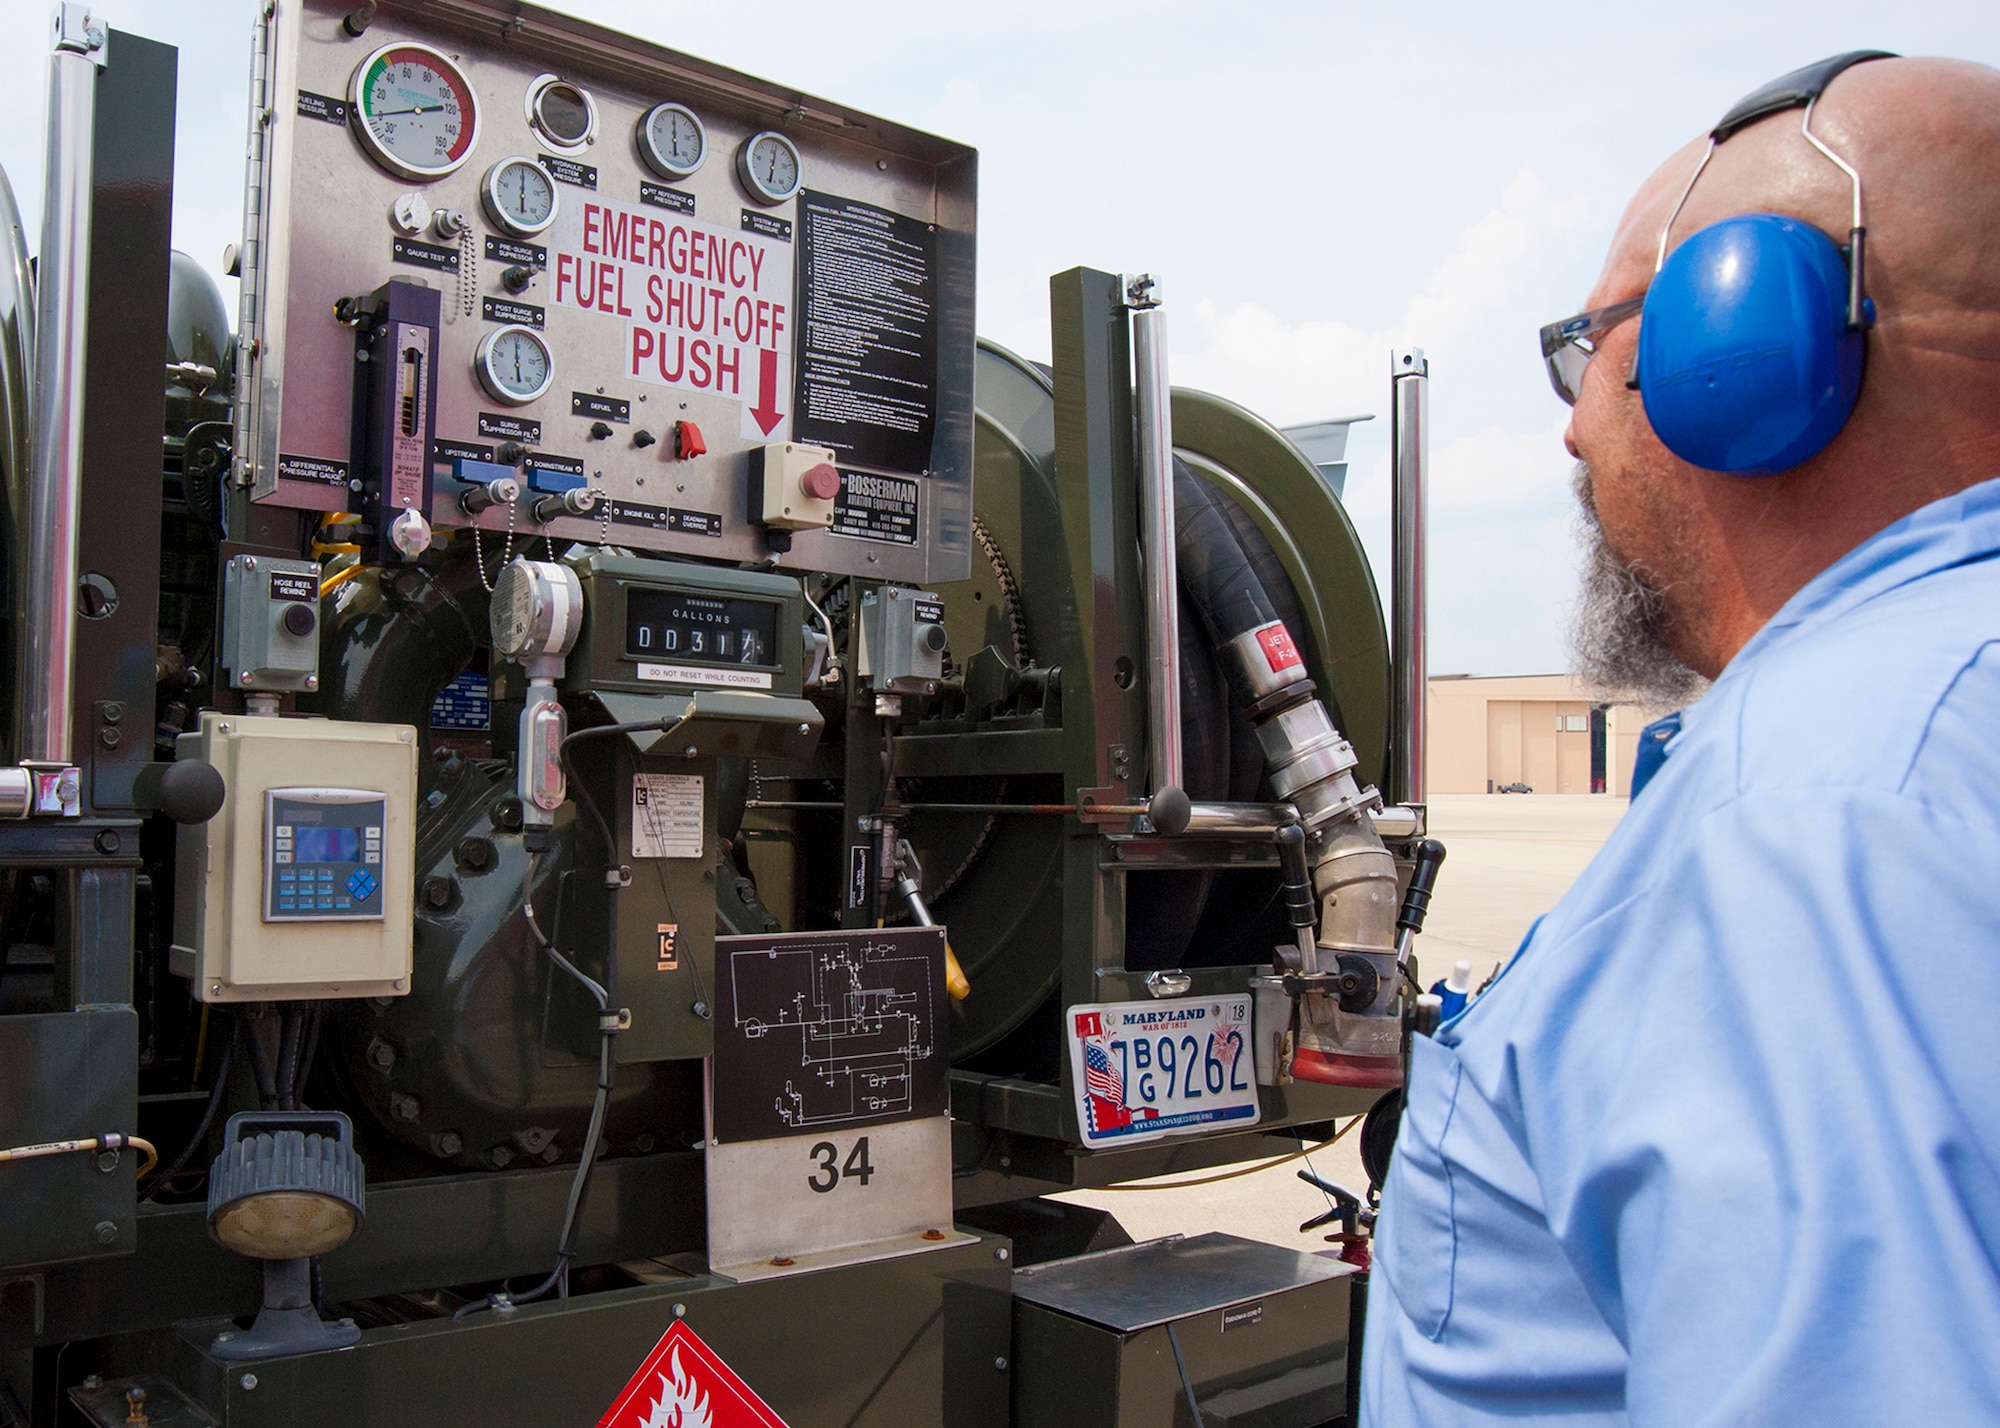 Bob Taylor, Akima Technical Solutions fuel distribution systems operator, monitors gauges on a fuel truck on the Joint Base Andrews, Maryland, flight line prior to refueling a 459th Air Refueling Wing KC-135R Stratotanker July 20, 2017. The KC-135 is refueled using a truck equipped with a hydraulic system to draw fuel from an underground reservoir onto the aircraft. (U.S Air Force photo/Tech. Sgt. Kat Justen)